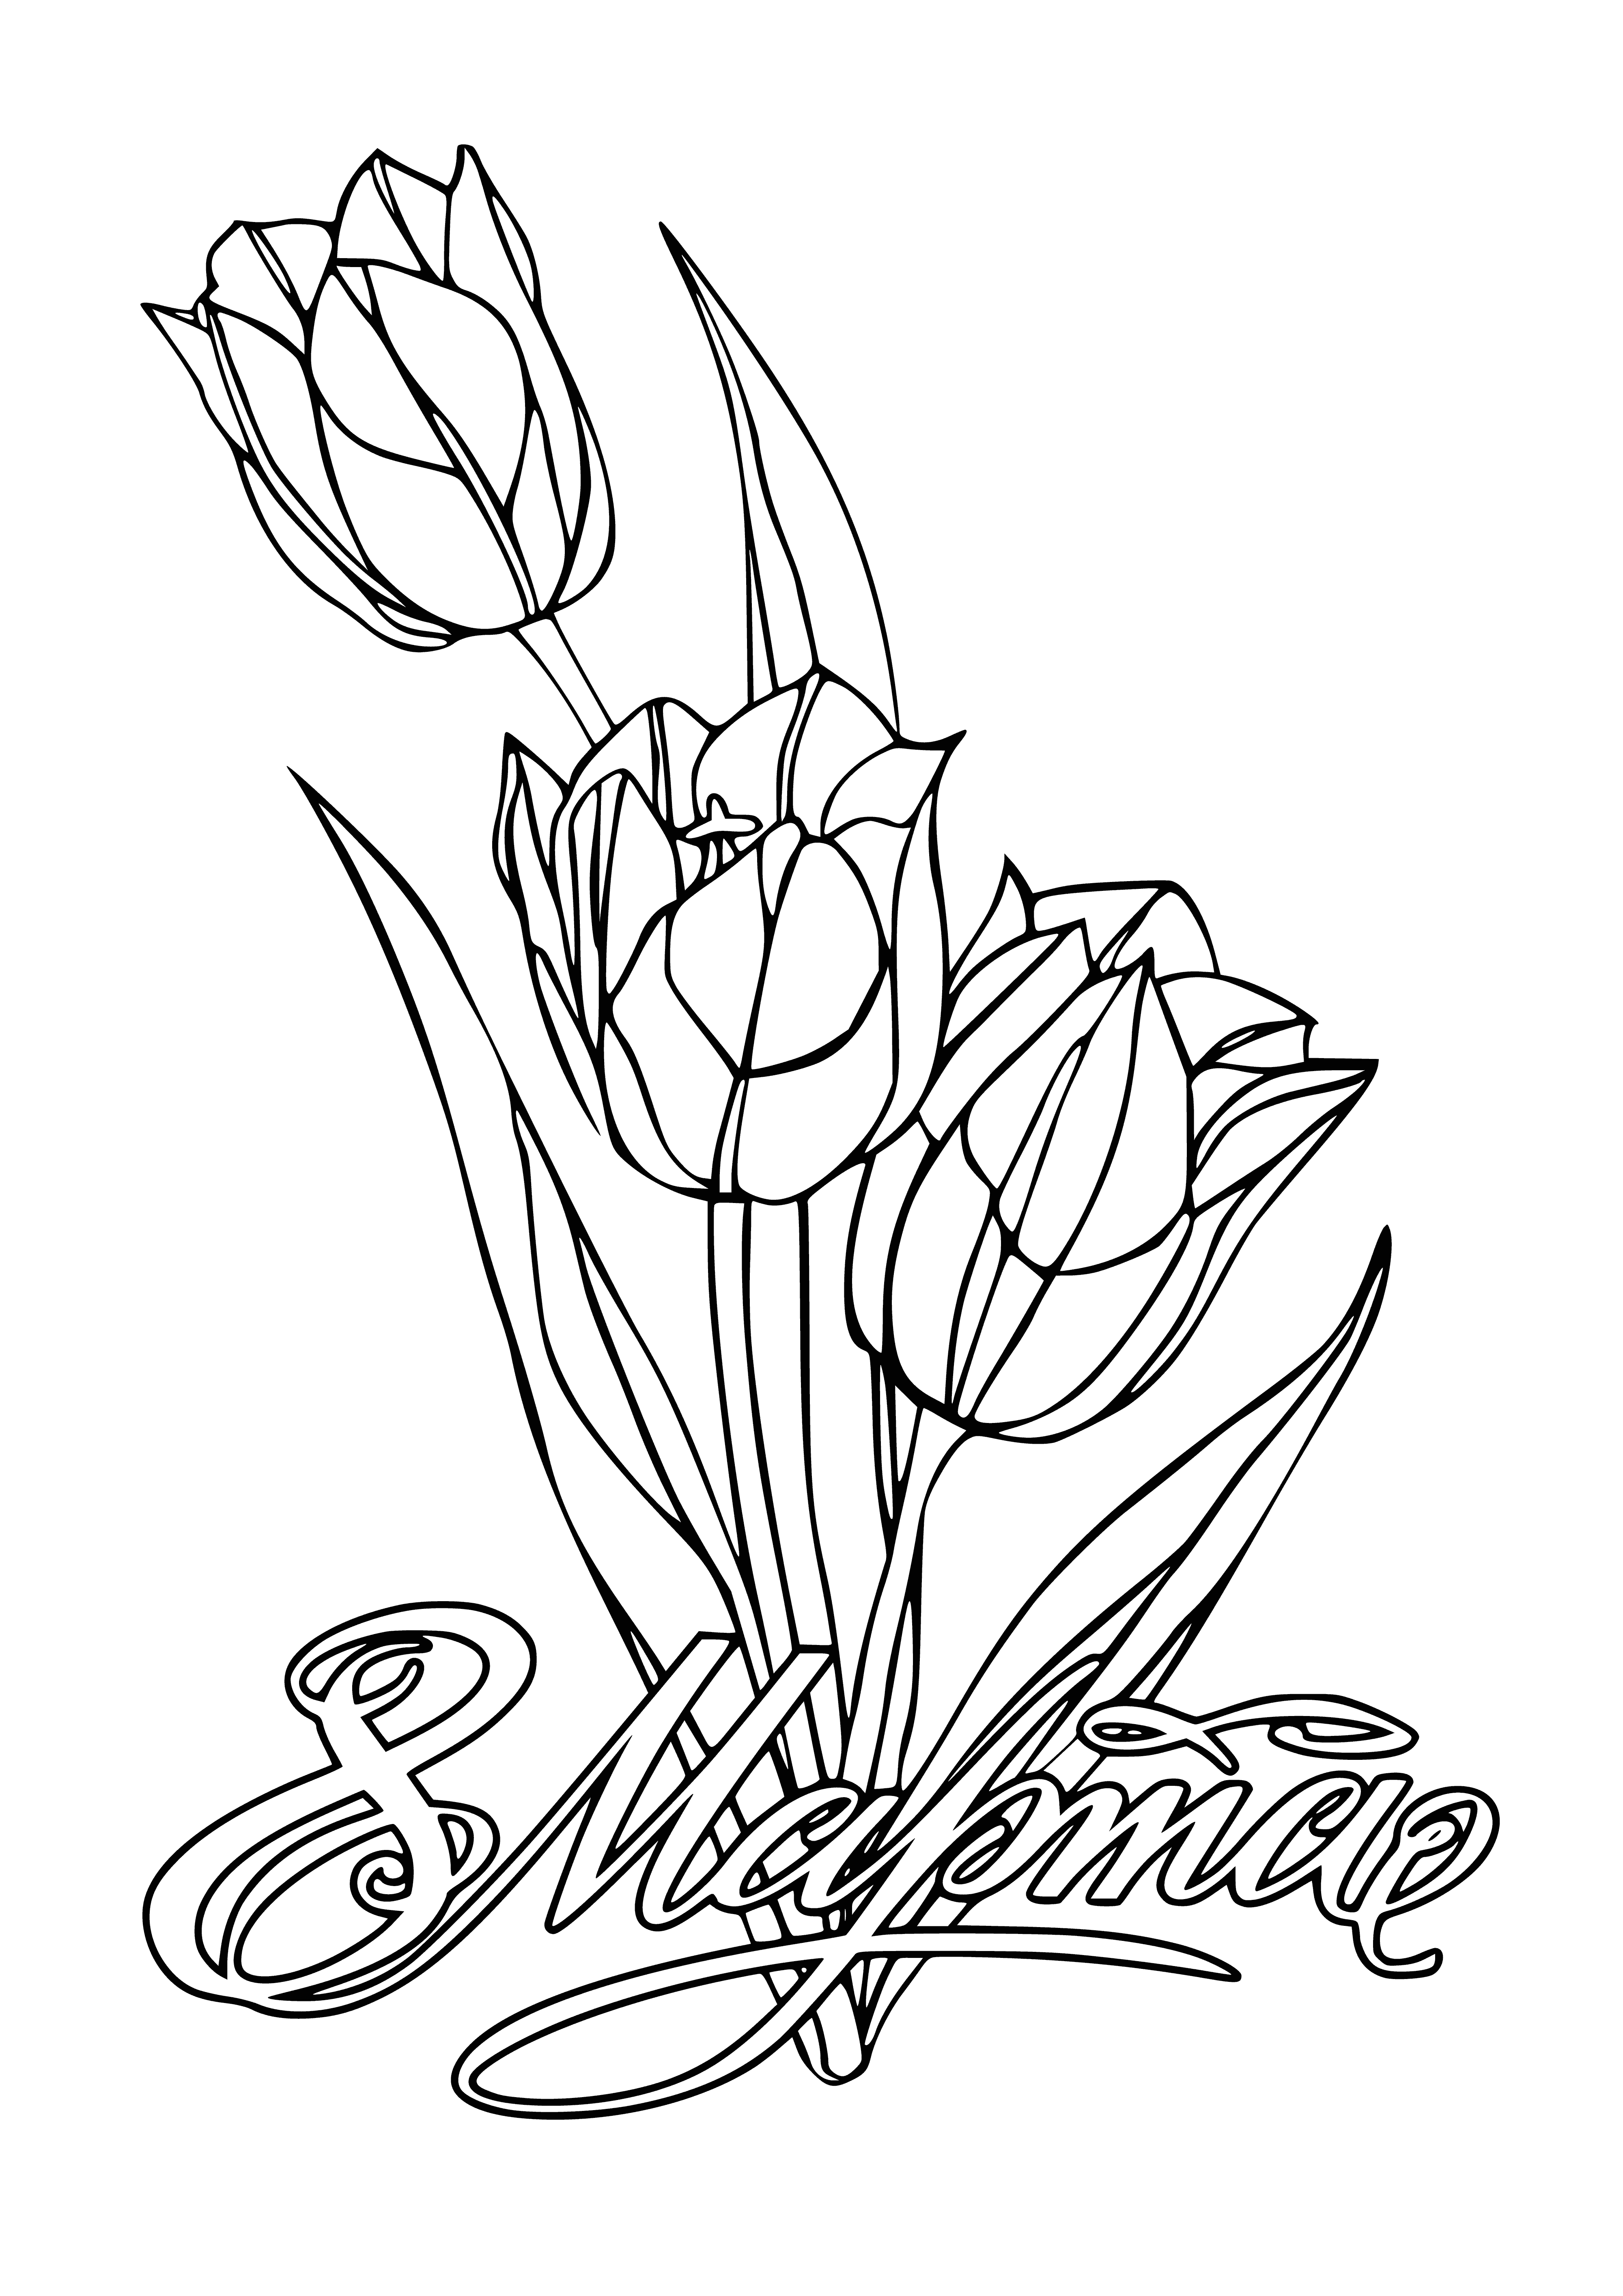 coloring page: Colorful tulips in a vase of differing colors in full bloom with visible stems and leaves. Vase is white and curved. #BotanicalBeauty